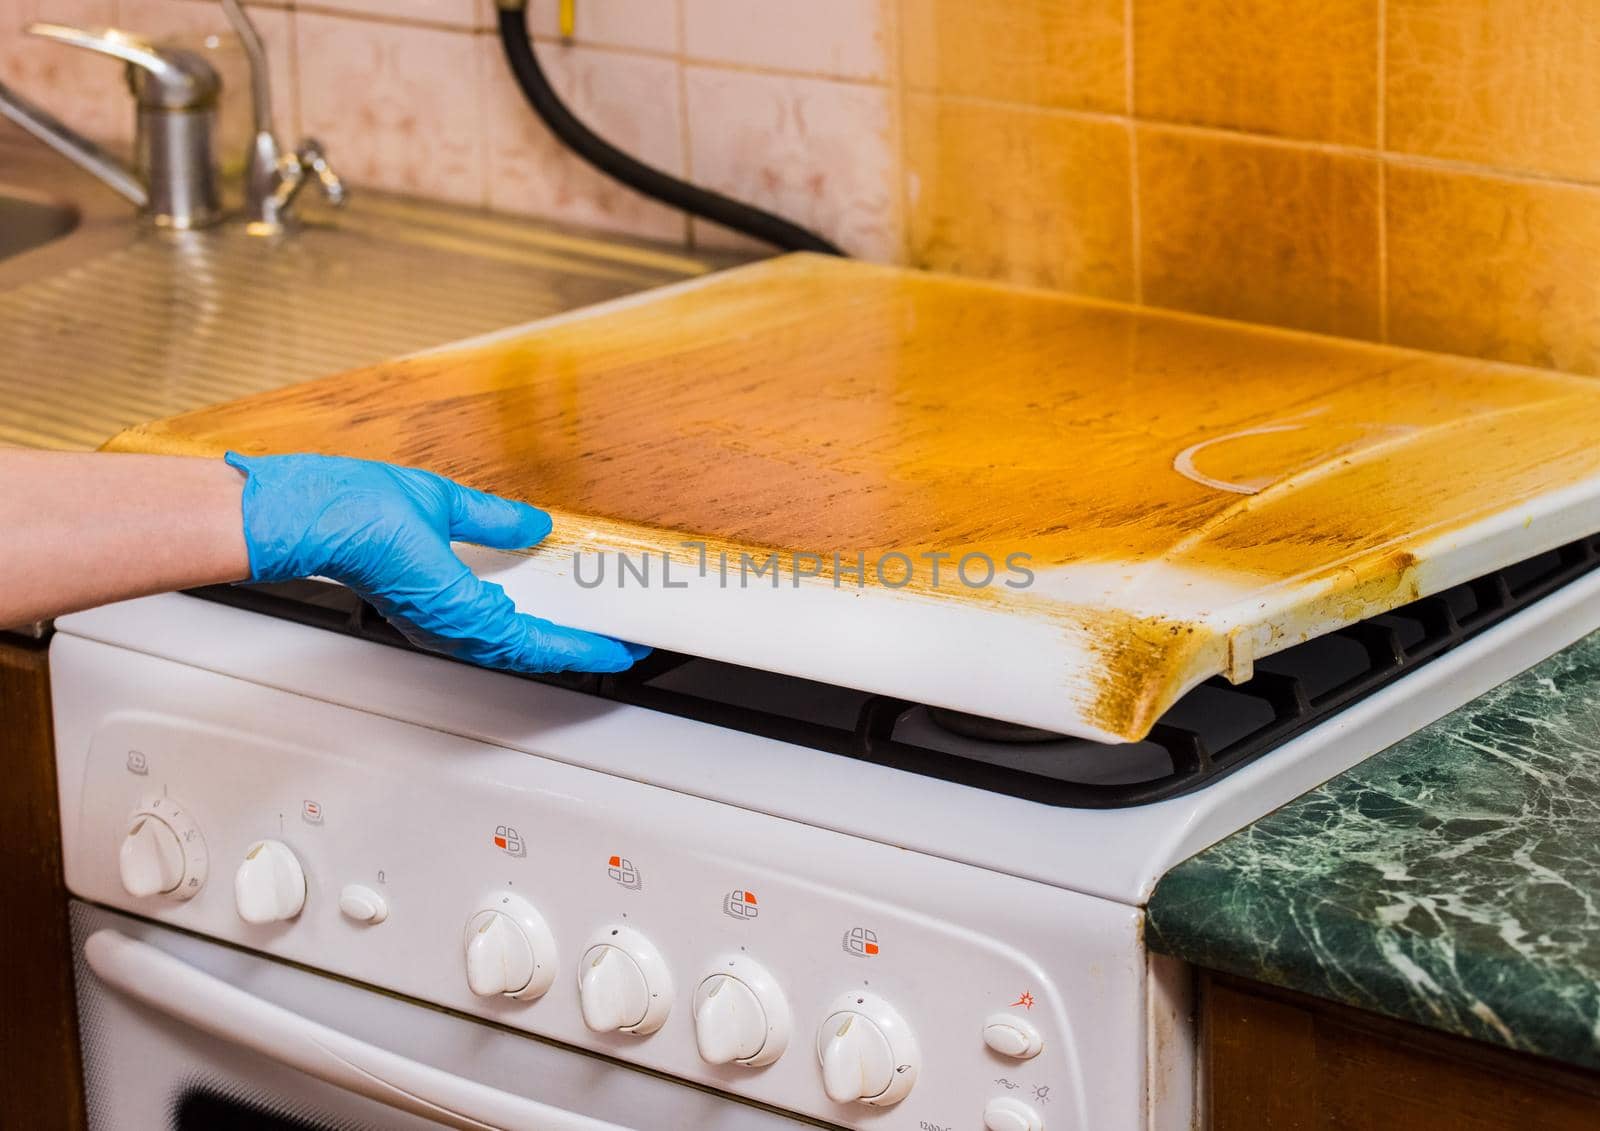 A woman's hand of a housewife in a household rubber glove holds the lid of a dirty gas stove with a sticky coating. Home cleaning of the kitchen by AYDO8